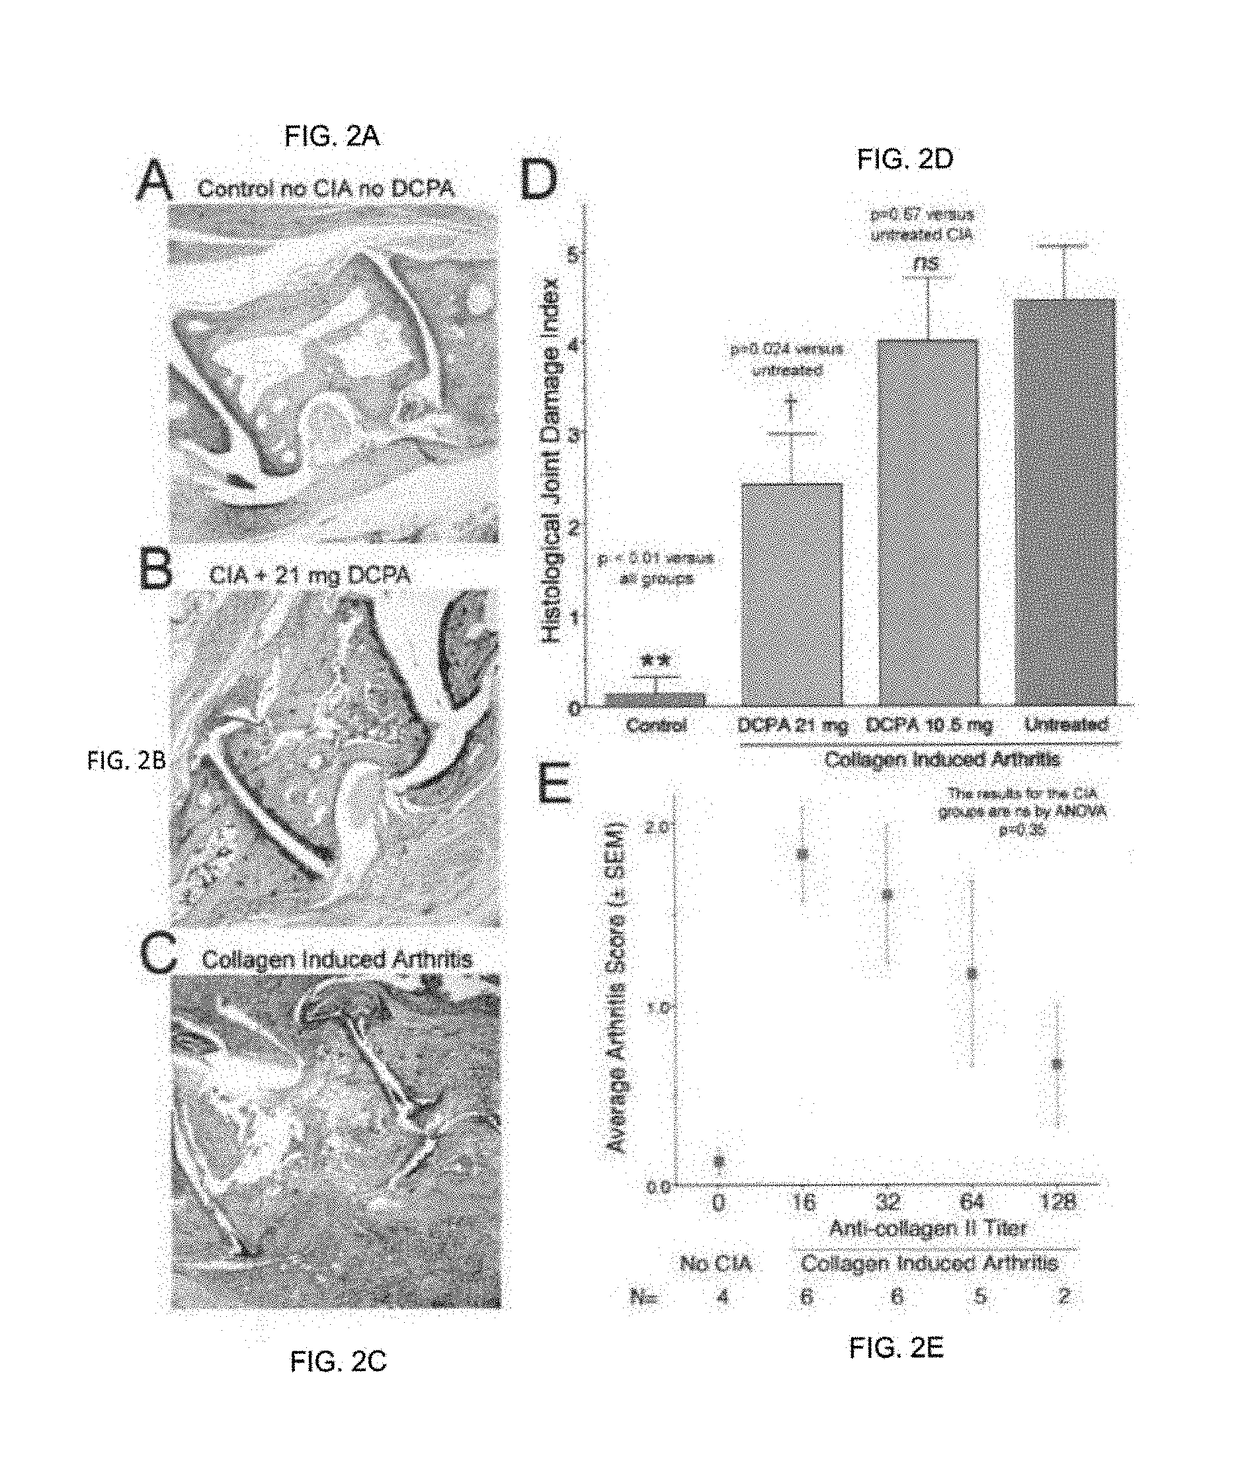 Water soluble haloanilide calcium-release calcium channel inhibitory compounds and methods to control bone erosion and inflammation associated with arthritides